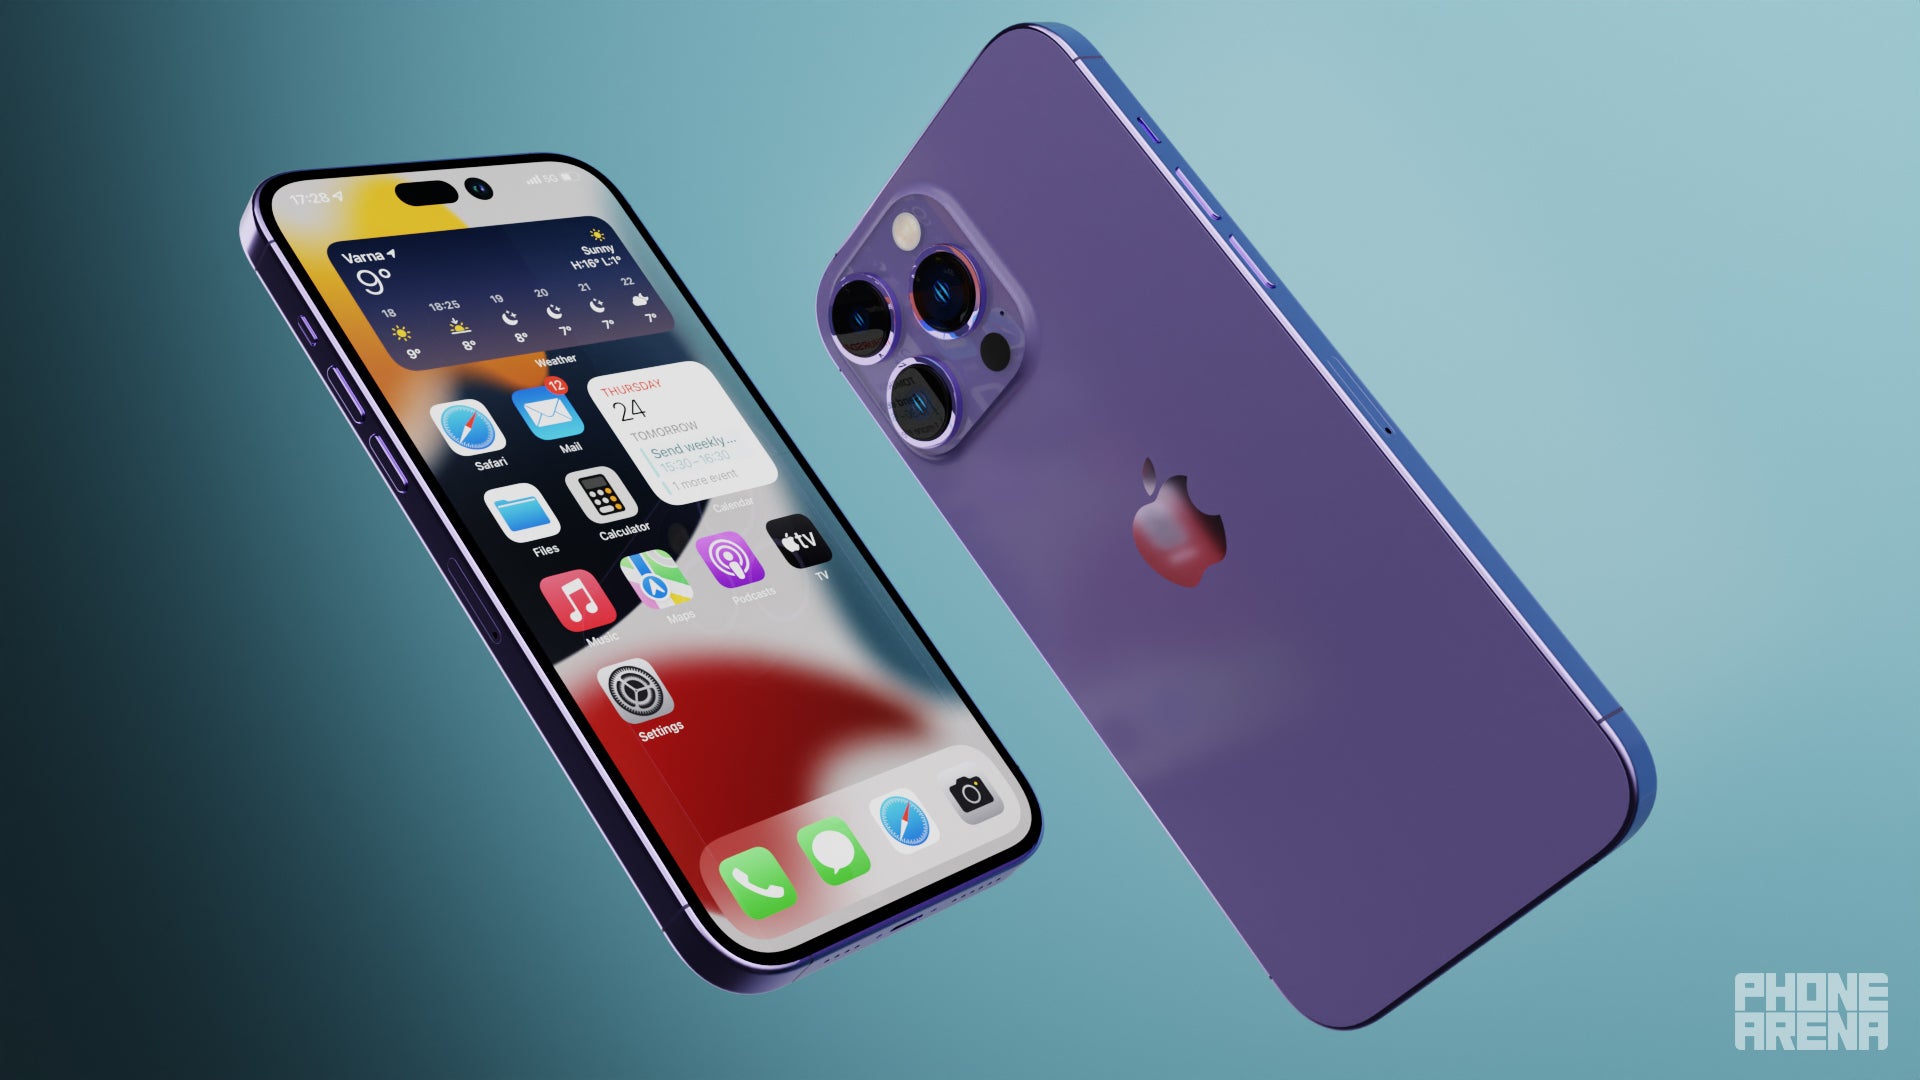 Purple would be nice too.  iPhone 14 Pro Max with 5000 mAh battery will be the end of the Android vs Apple battery debate